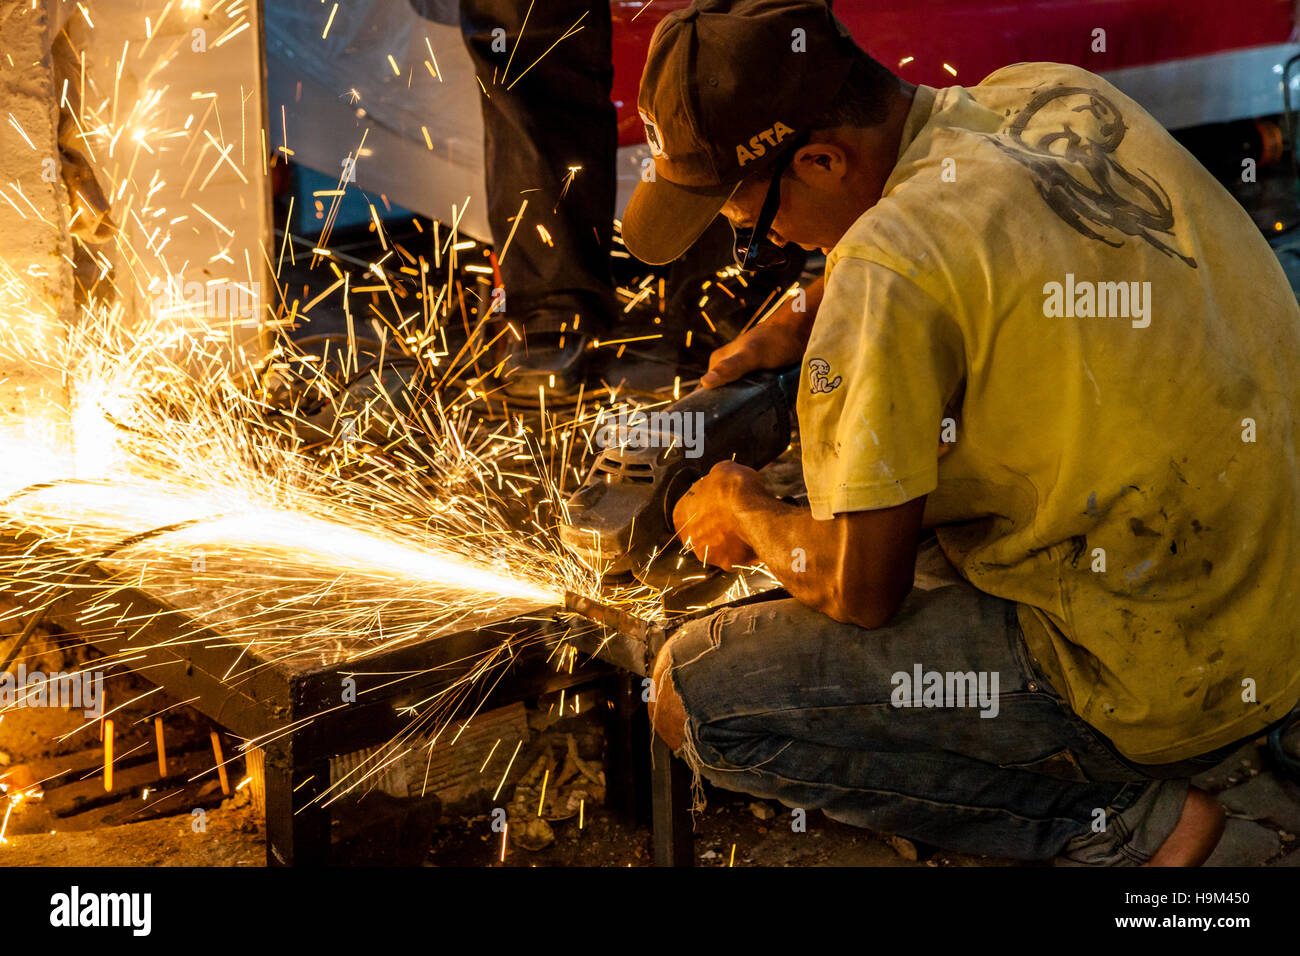 A Metalworker Working In The Street In The Medina, Fez el Bali, Fez, Morocco Stock Photo